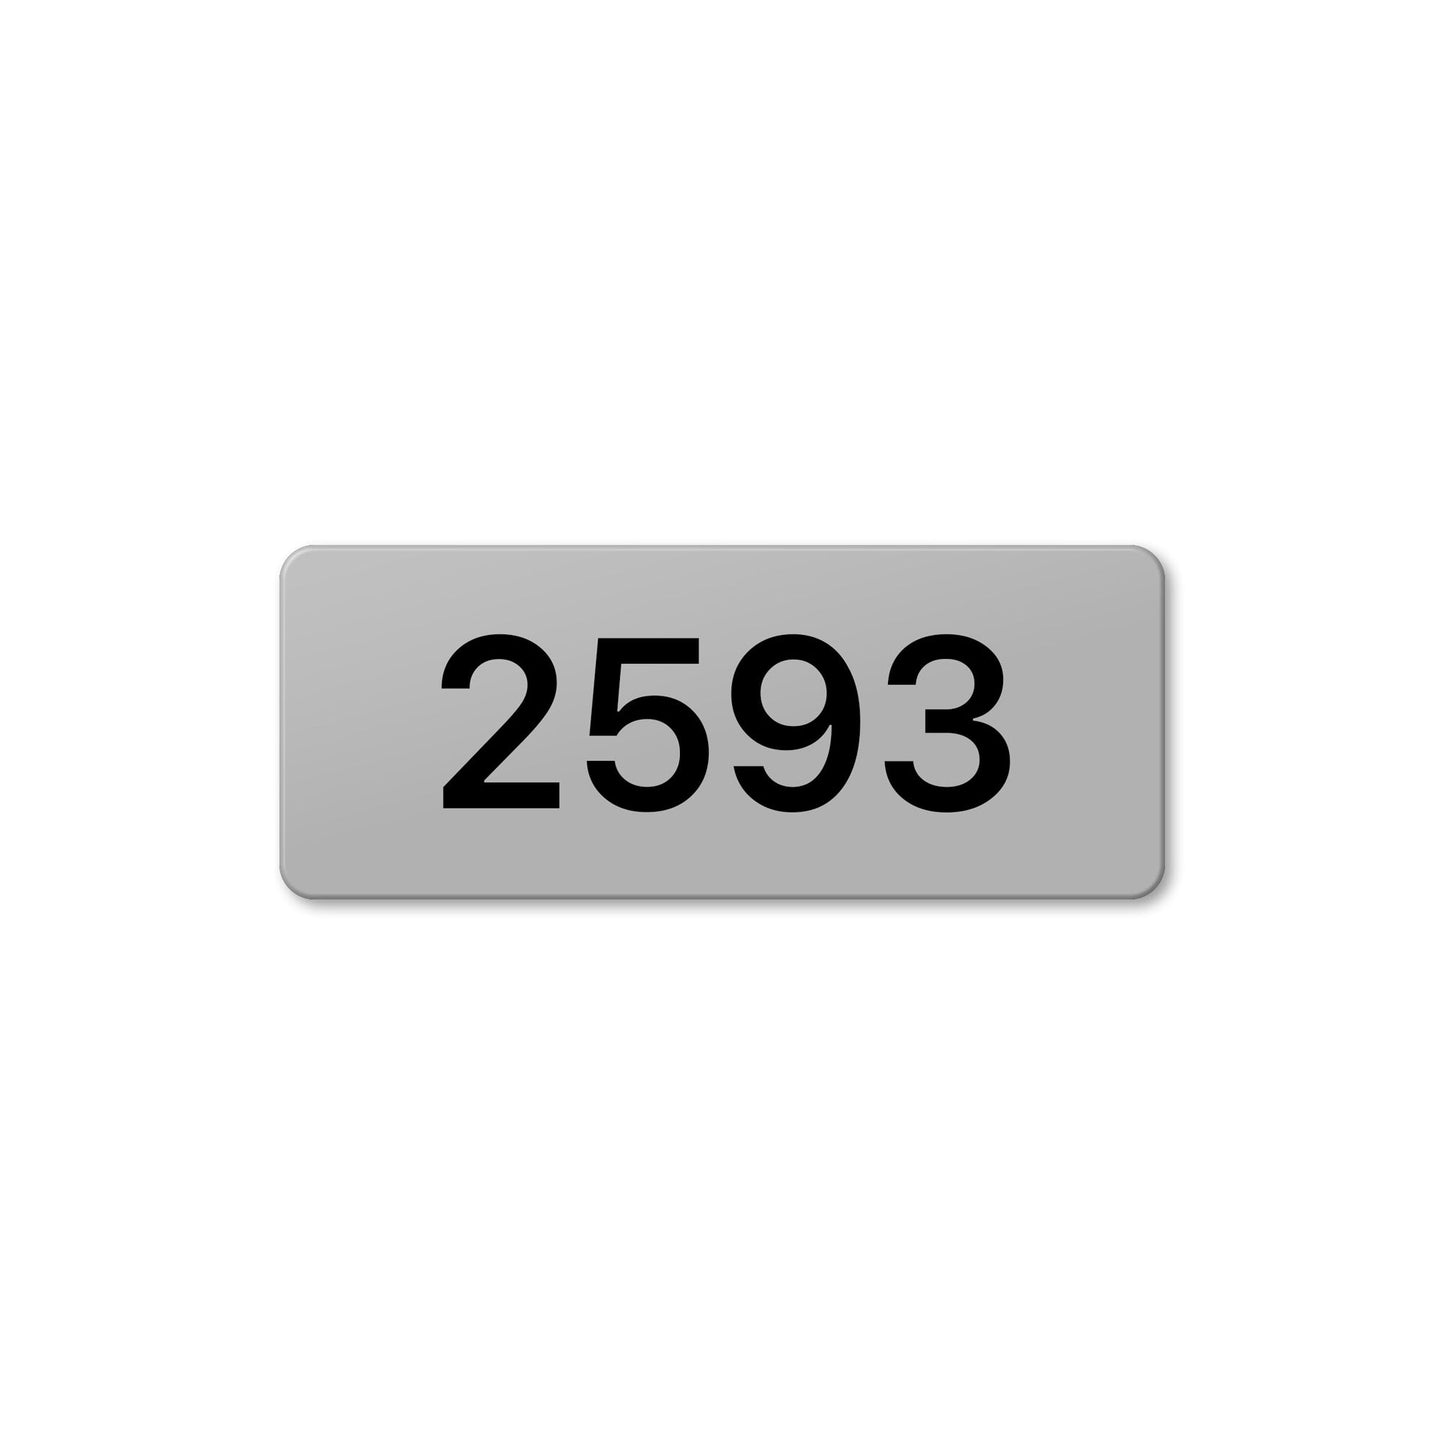 Numeral 2593